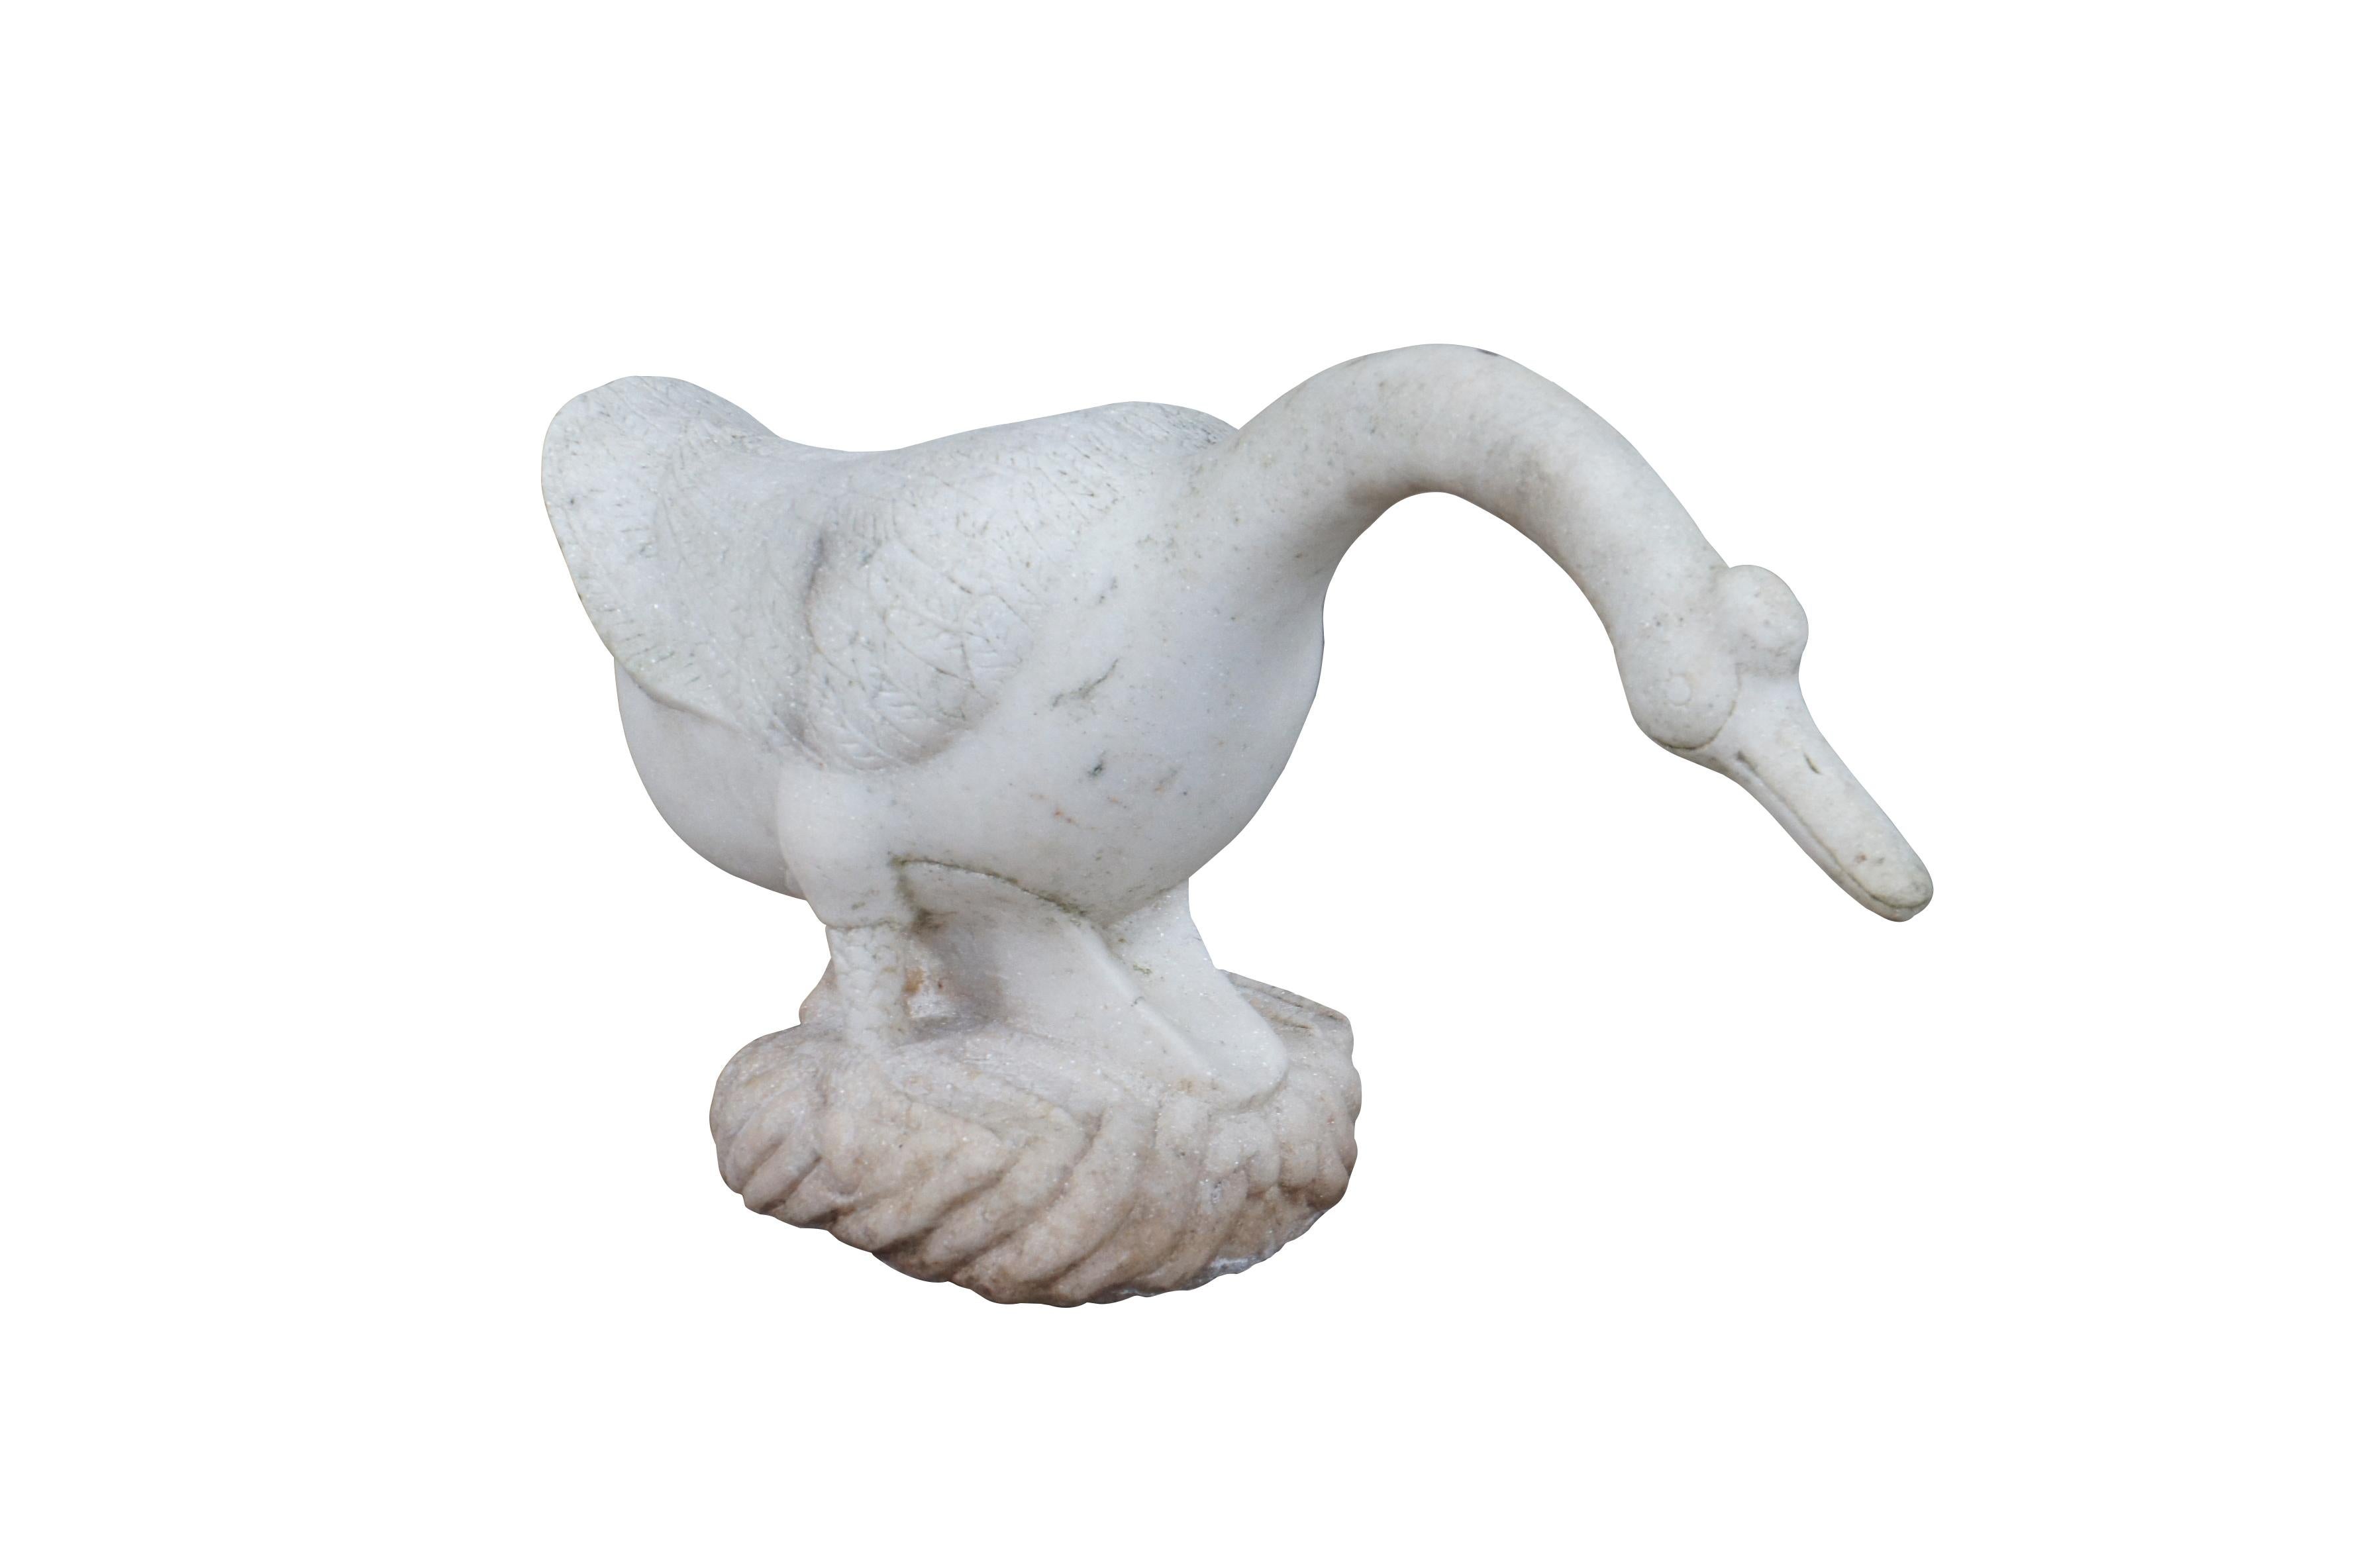 Heavy antique carved marble goose garden sculpture.  Made in Italy circa 1930s.

Dimensions:
25